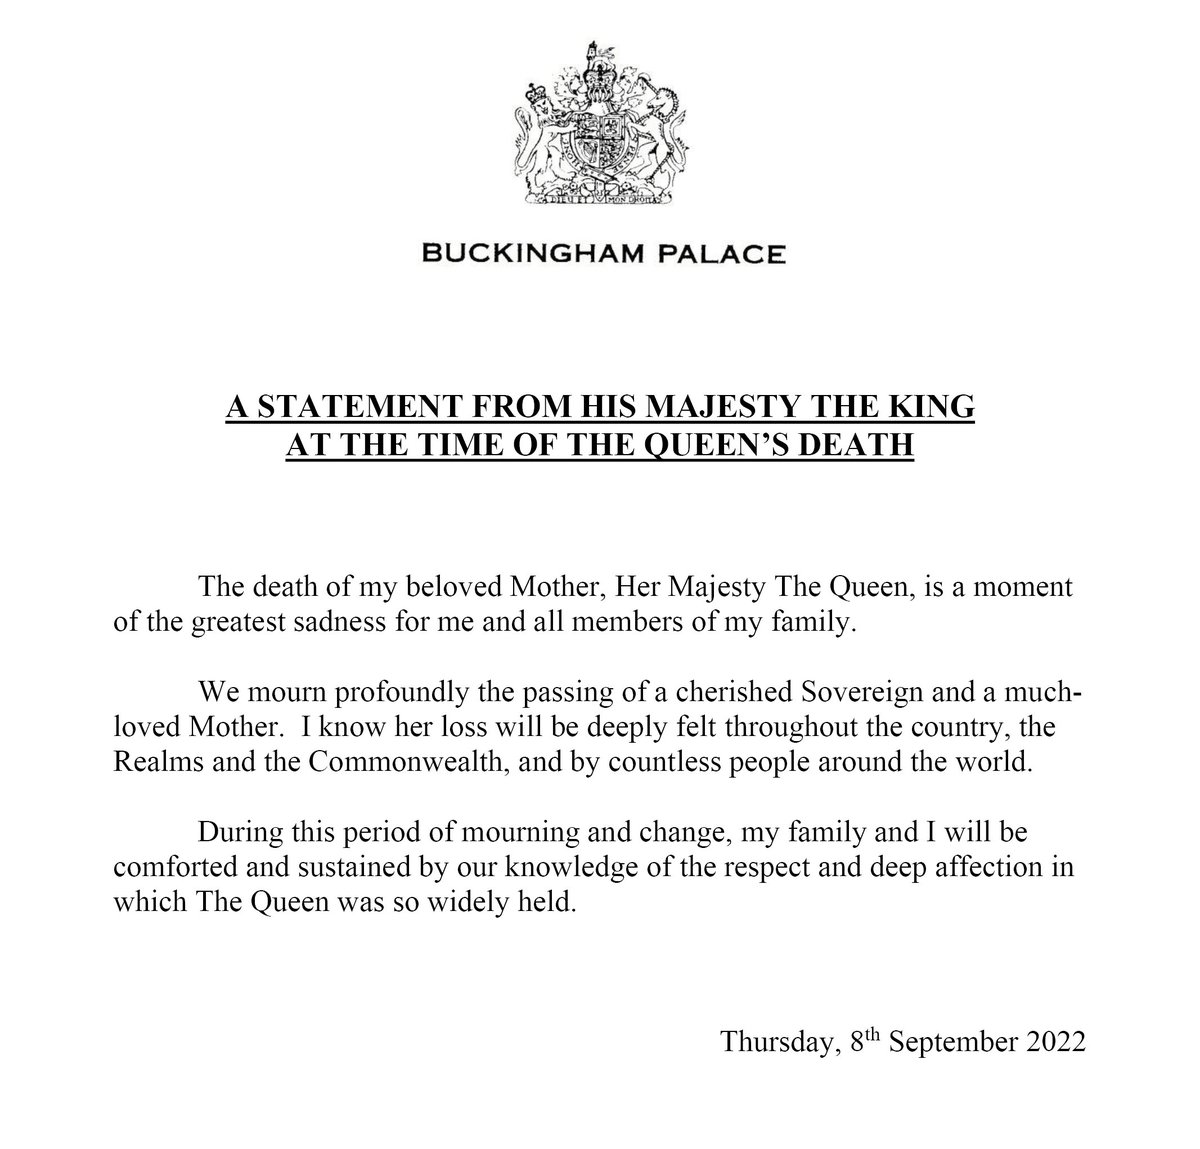 A statement from His Majesty The King: